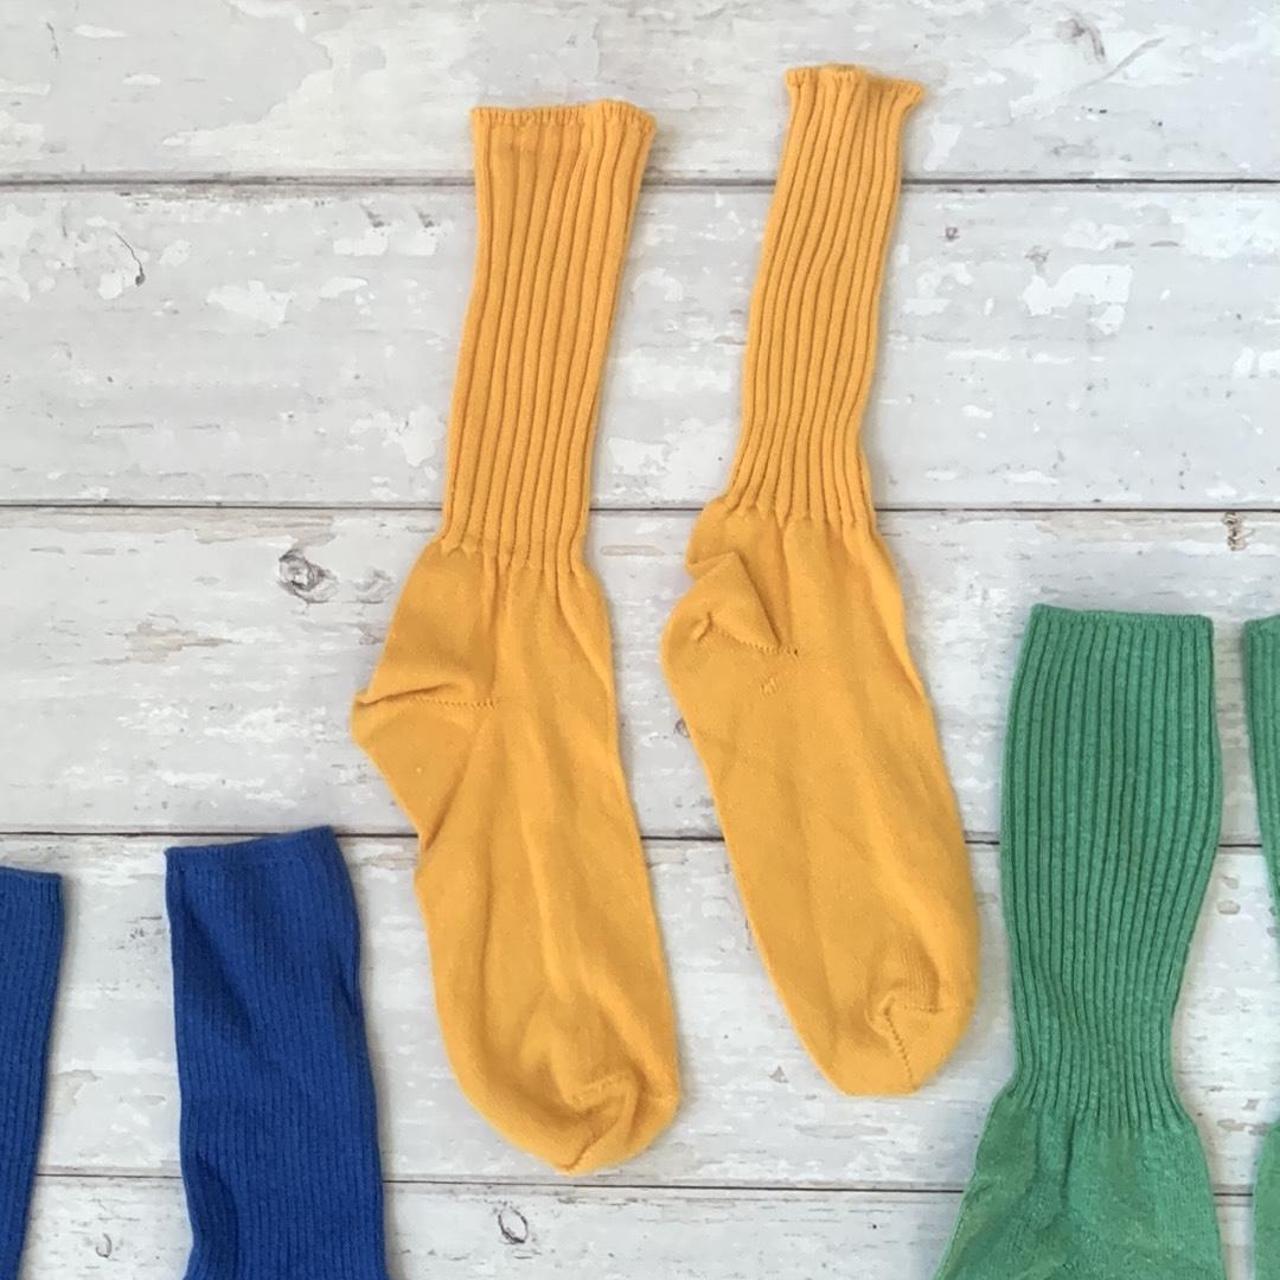 PacSun Men's Green and Blue Socks (3)